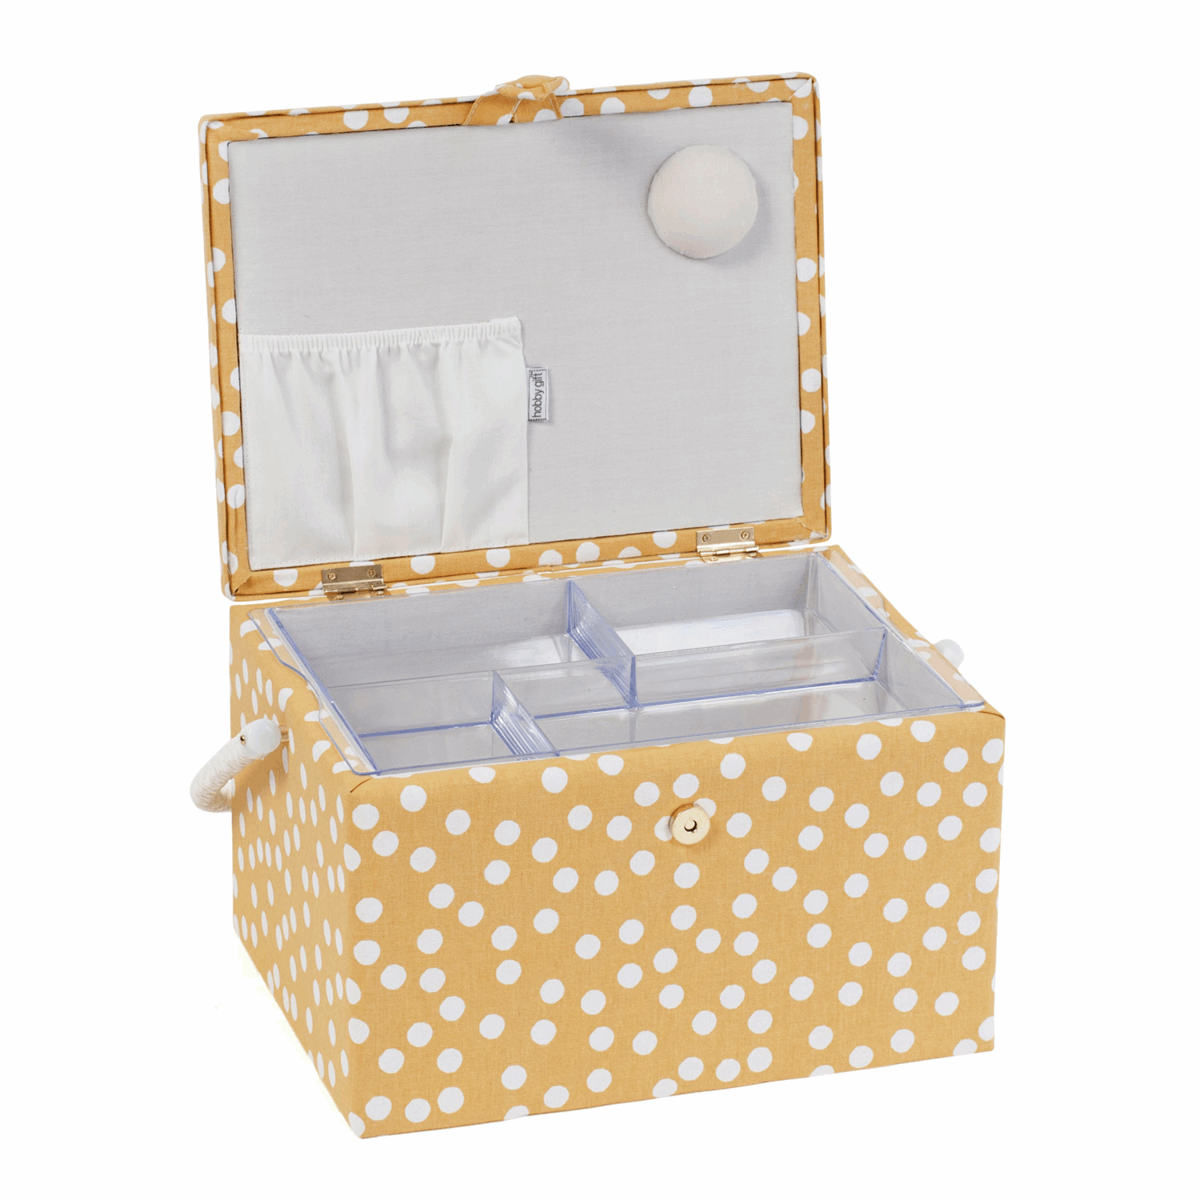 Hobby Gift Sewing Box Large Orche Spot